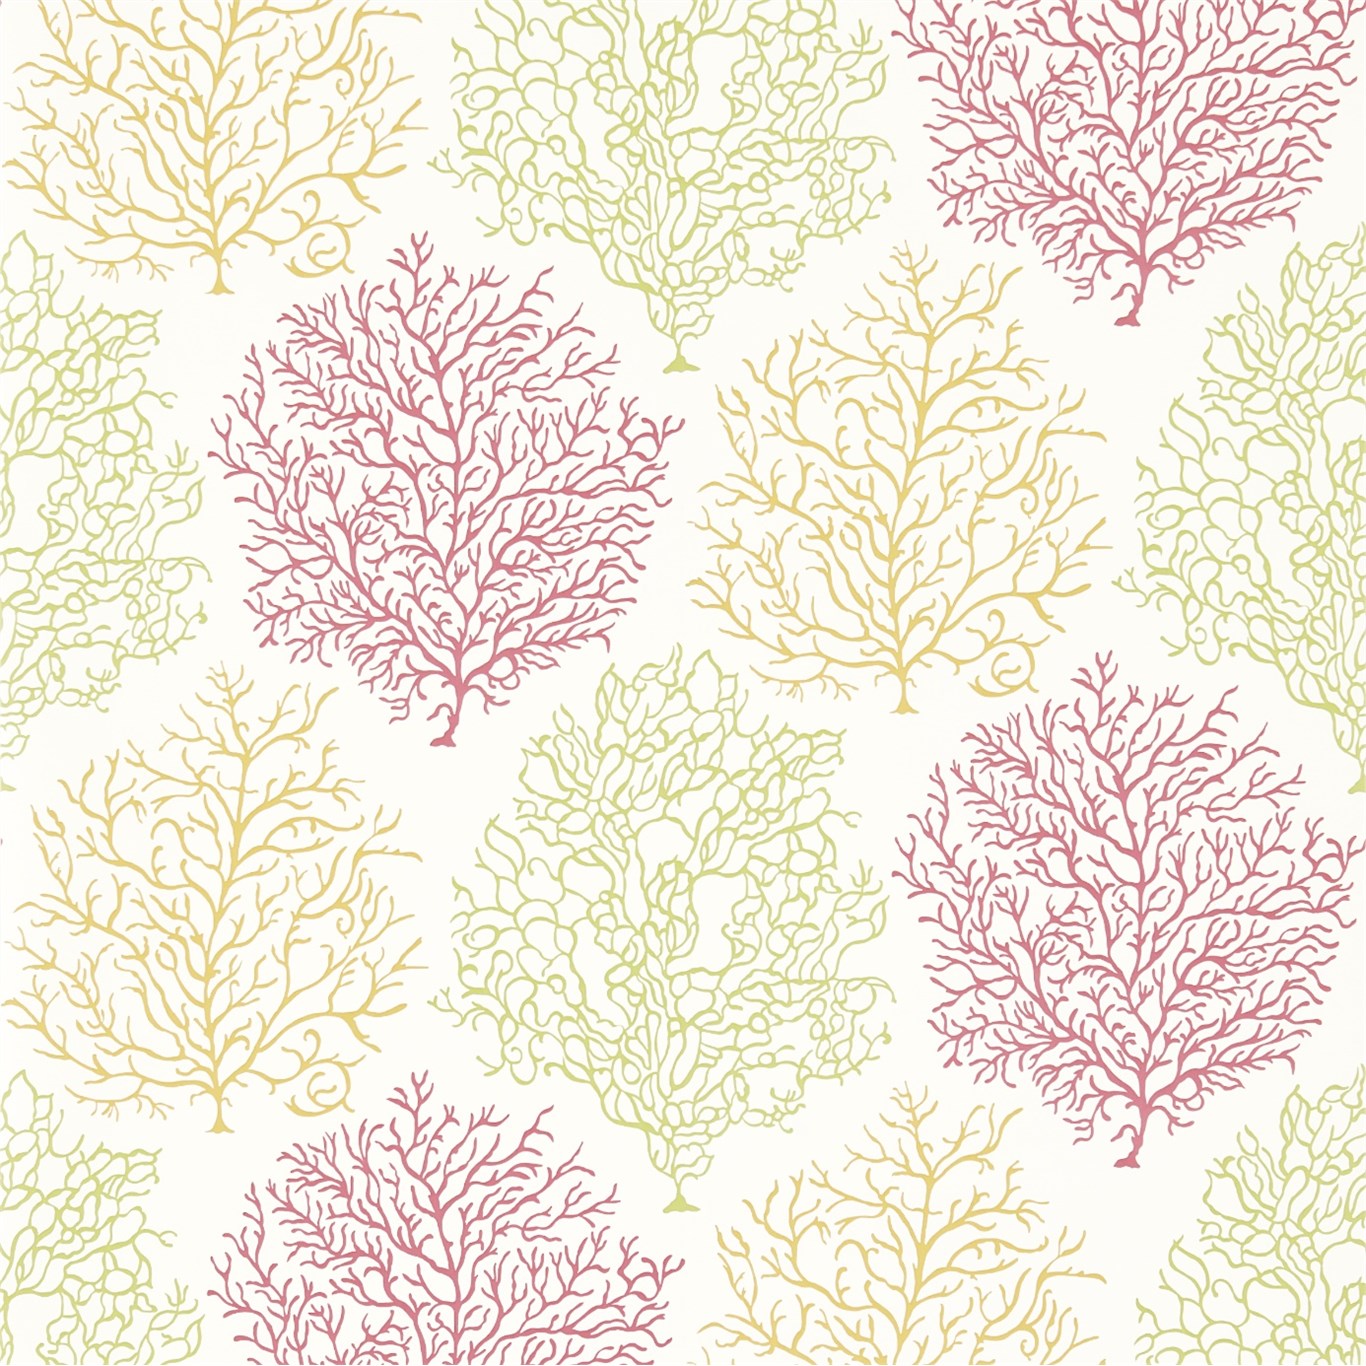 Wallpaper - Sanderson Voyage of Discovery Coral Reef Tropical/Brights